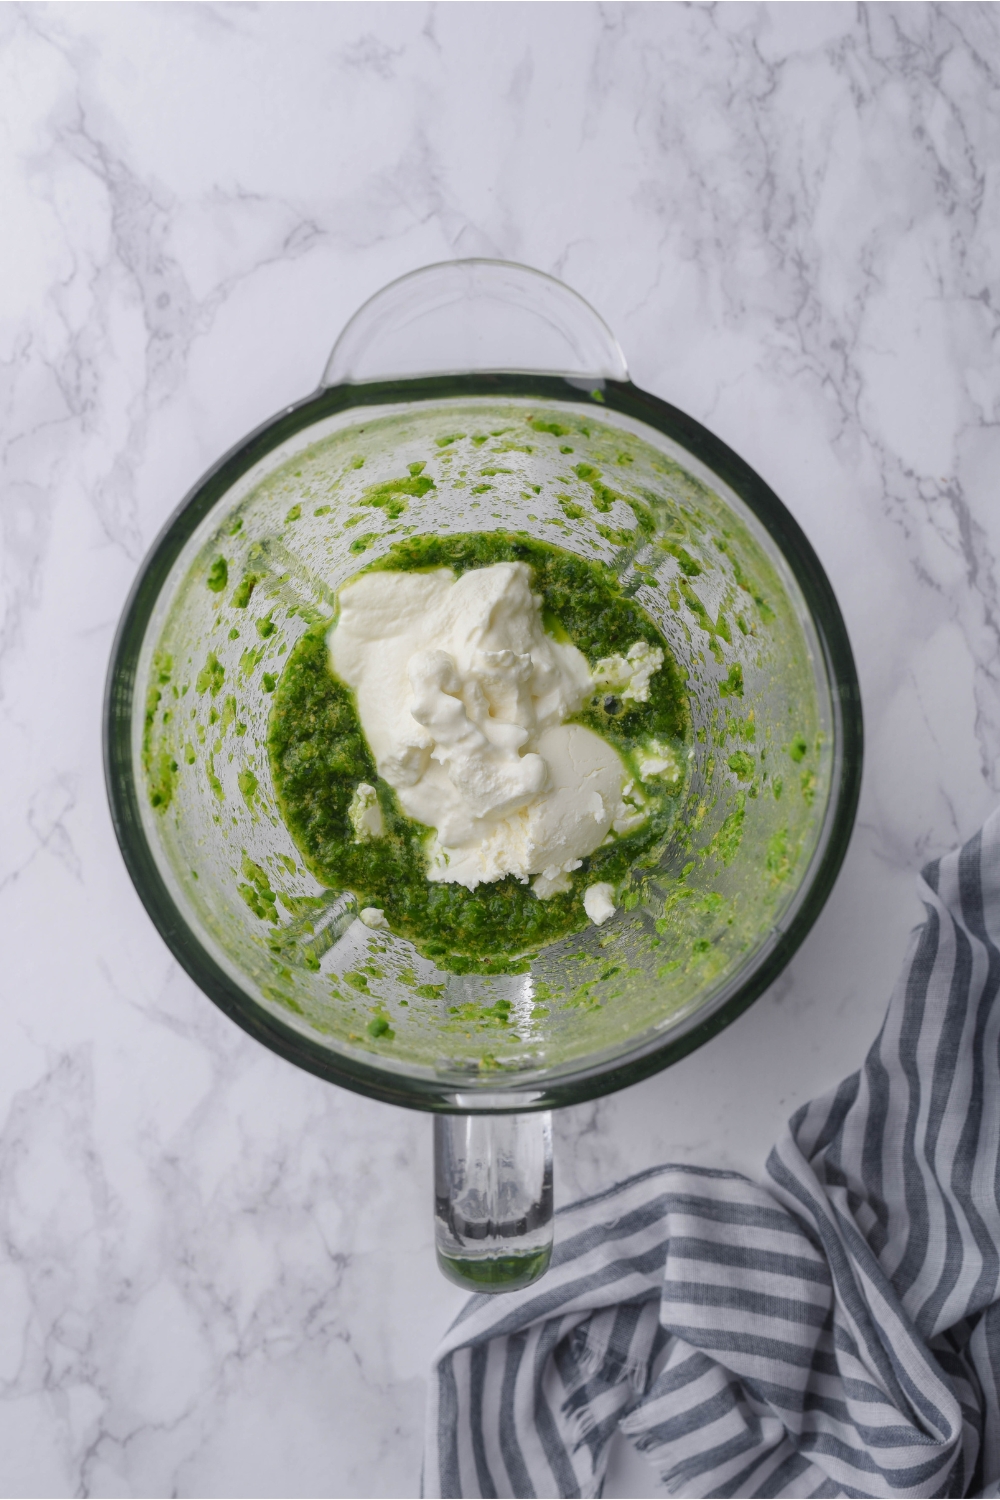 A food processor filled with a blended green sauce and a dollop of cream cheese that has not yet been mixed together with the green sauce.